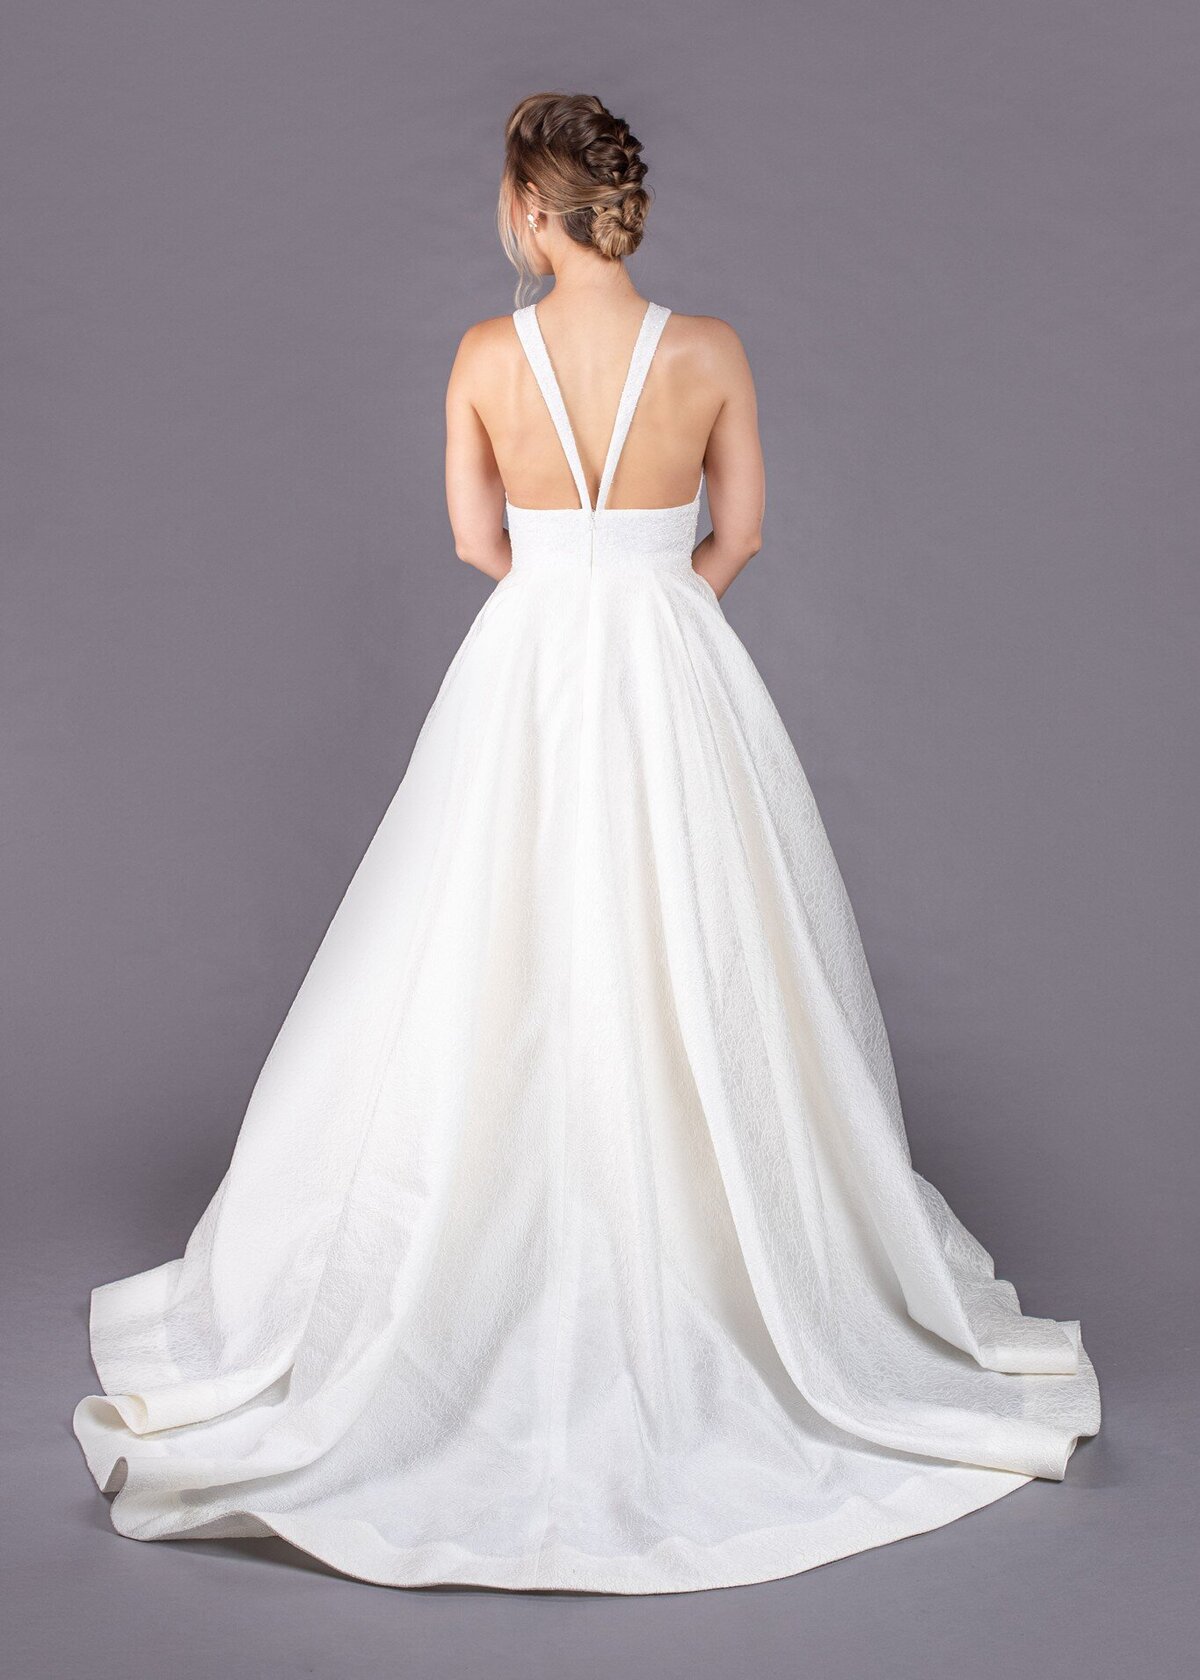 The back view of the Joan wedding dress style shows the full ballgown skirt is paired with a sexy v-back bodice.